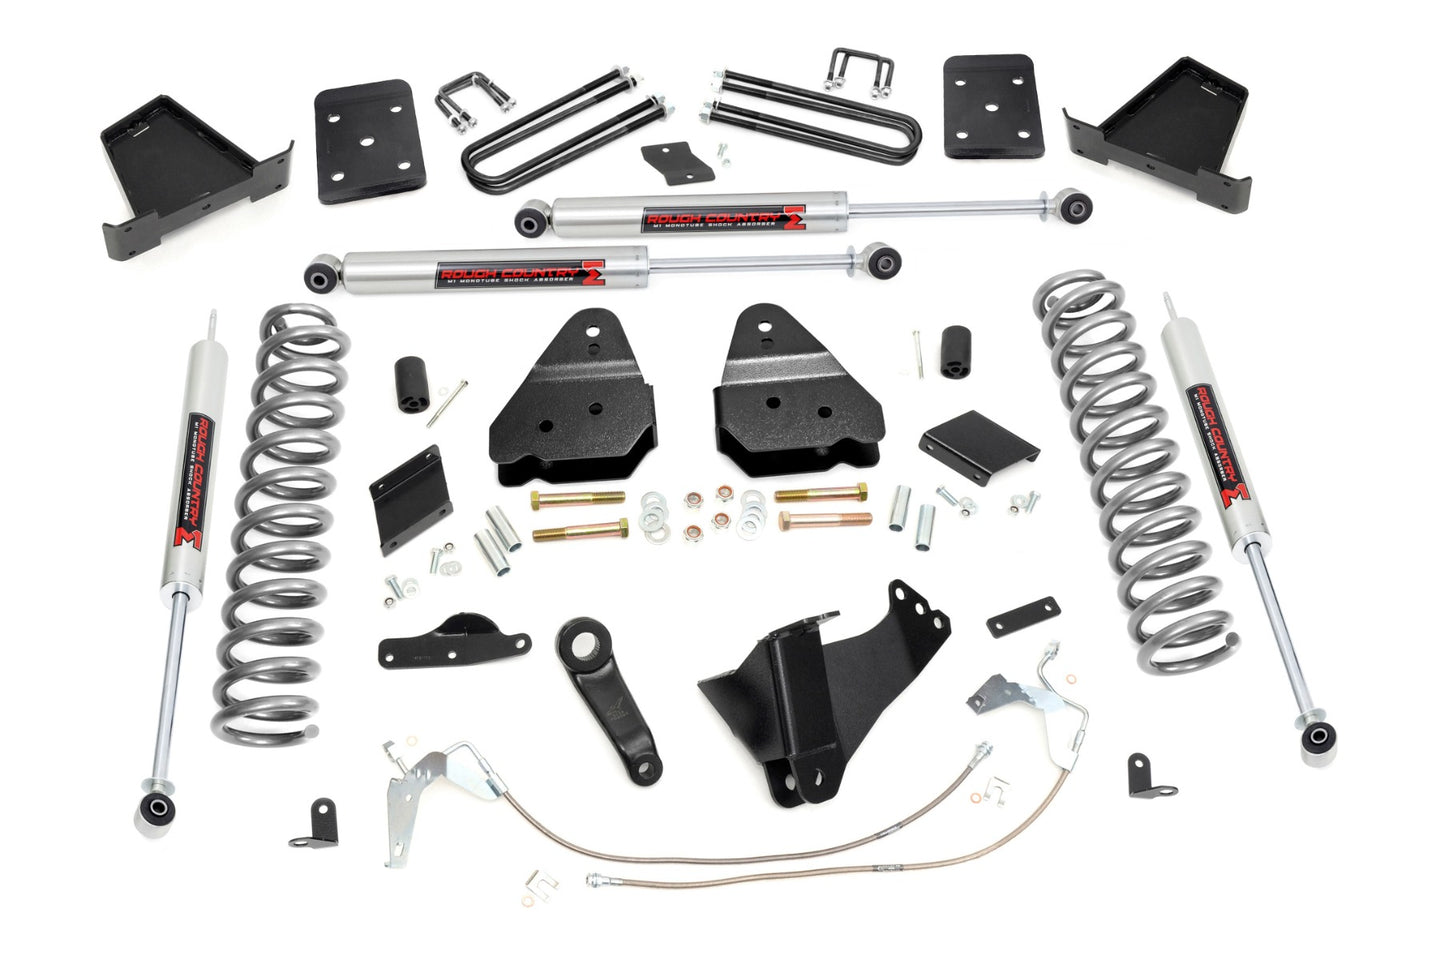 Rough Country (56640) 6 Inch Lift Kit | Gas | OVLD | M1 | Ford F-250 Super Duty 4WD (2011-2014)